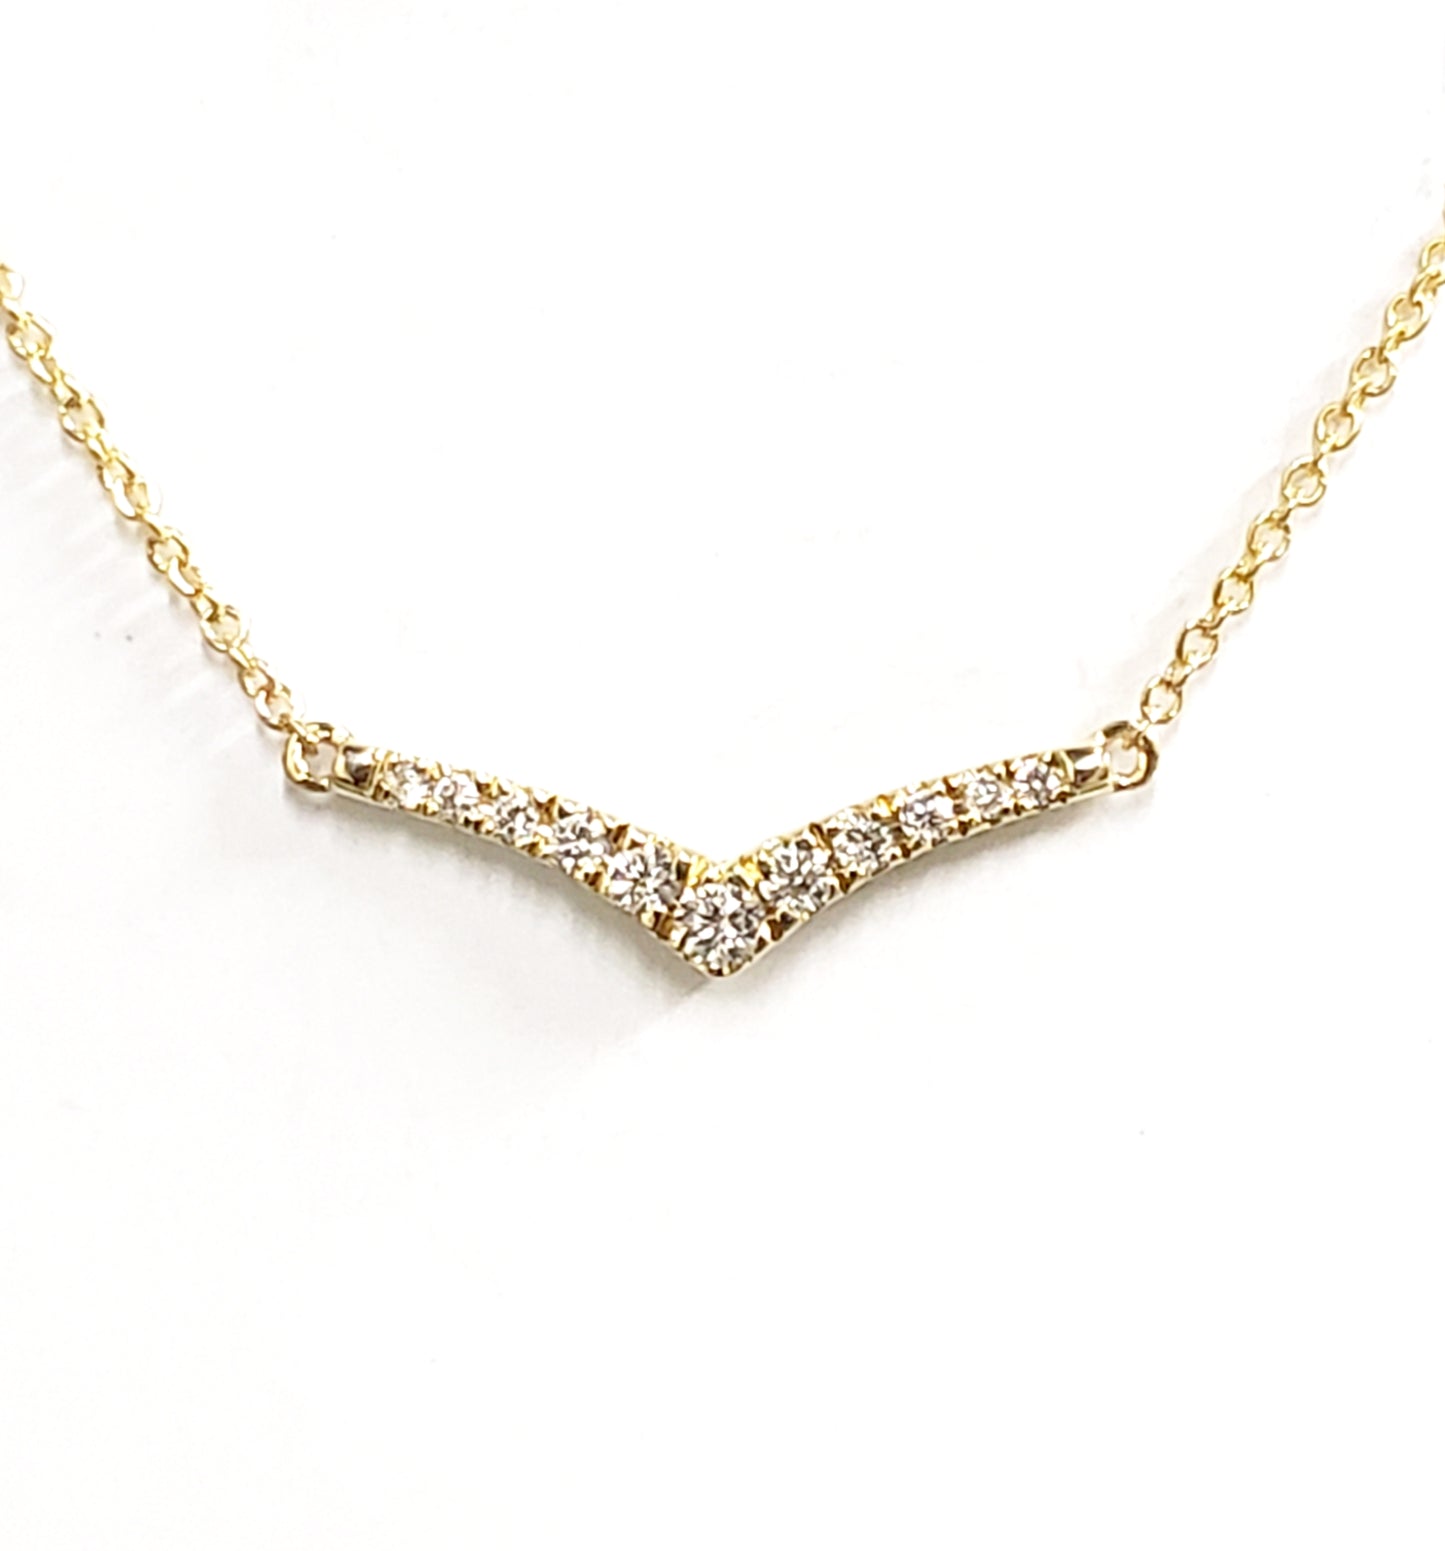 Yellow Gold and Diamond "V" shaped bar necklace - HK Jewels